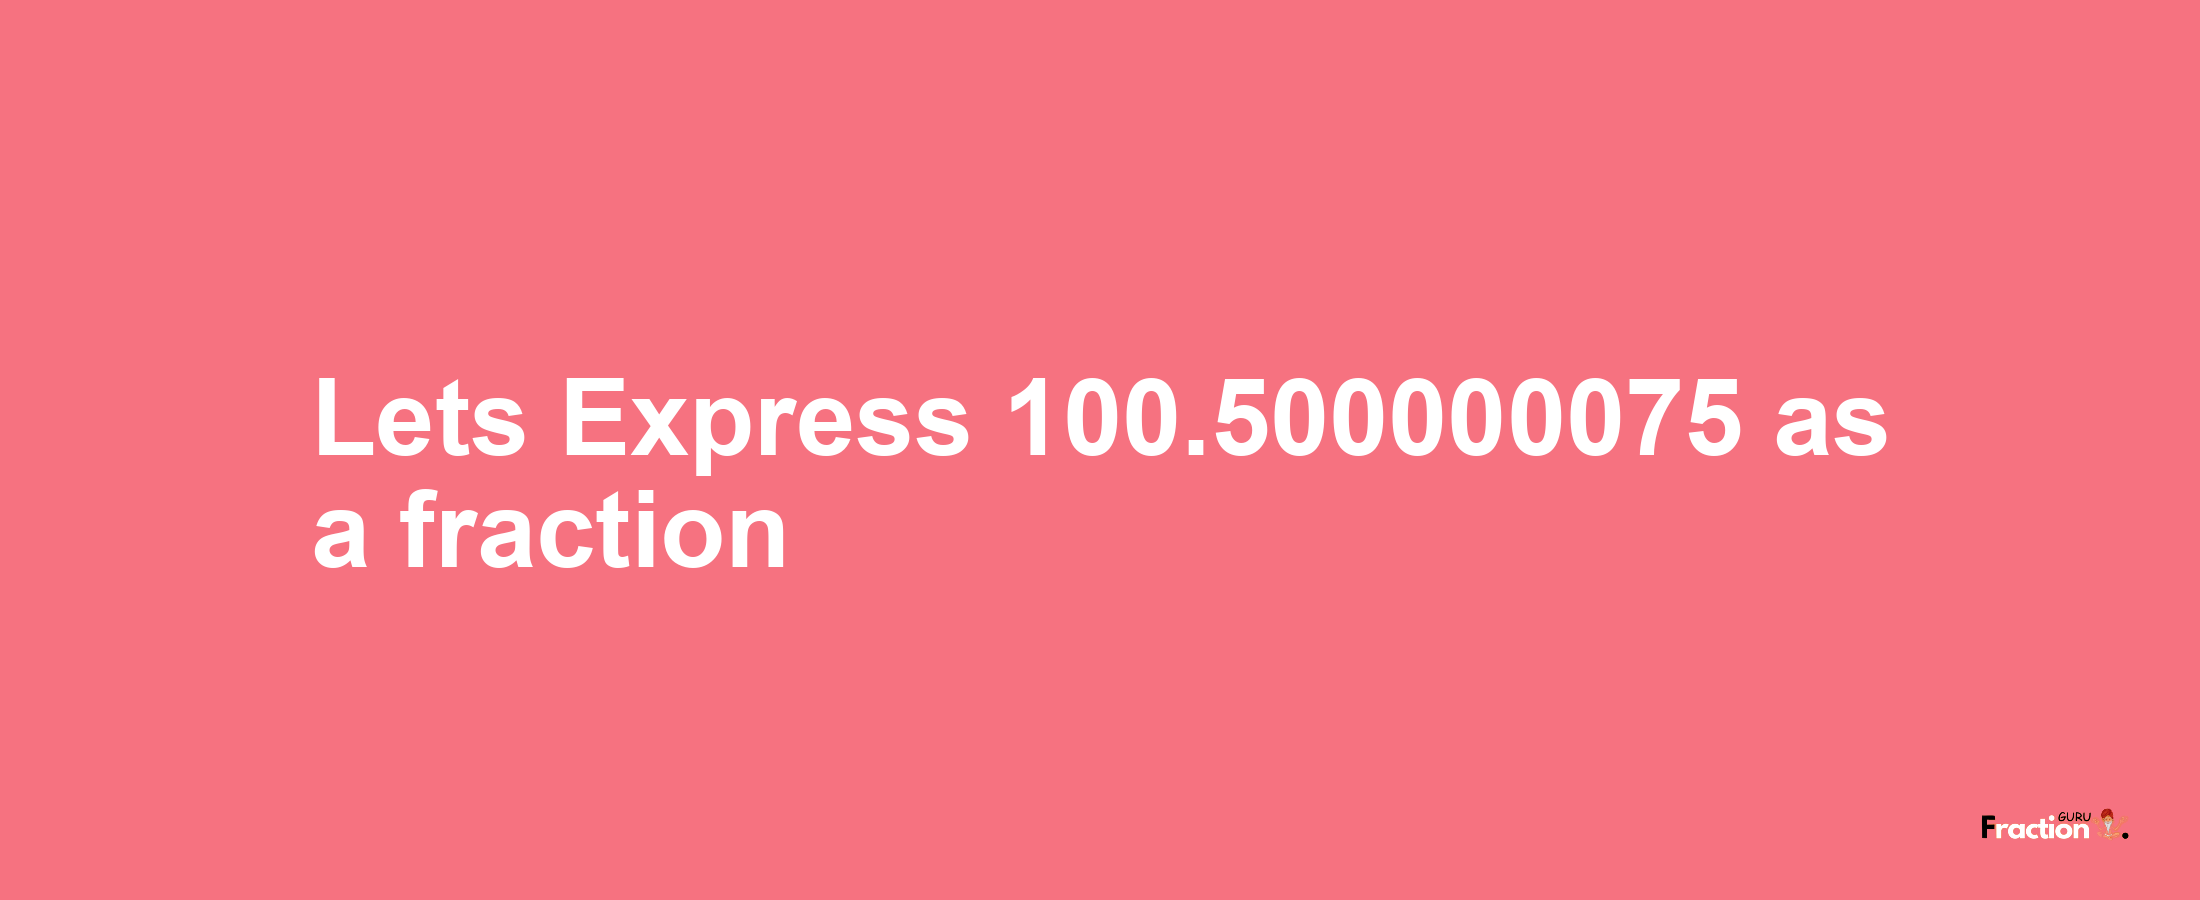 Lets Express 100.500000075 as afraction